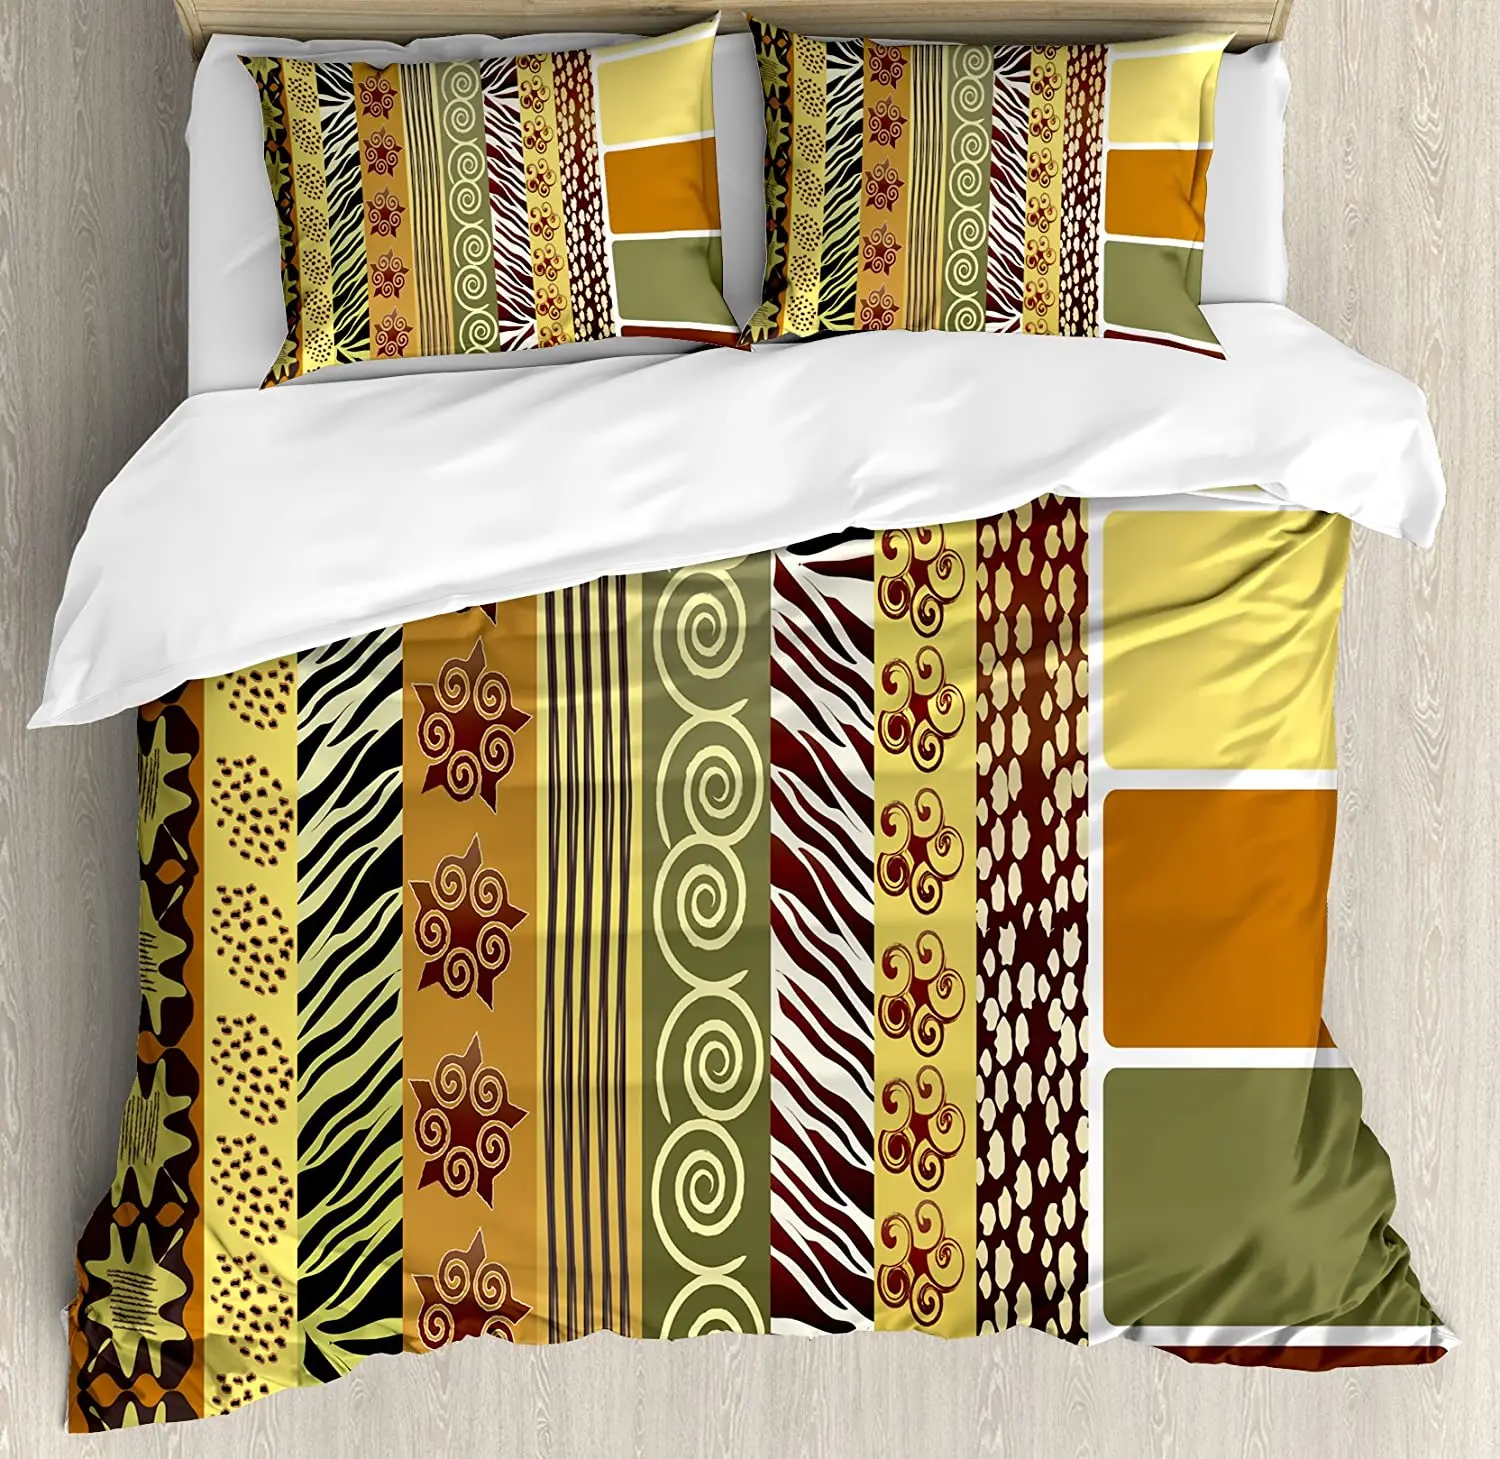 

Zambia Bedding Set Comforter Duvet Cover Pillow Shams Vintage Mixed African Pattern Ancient Earthen Bedding Cover Double Bed Set